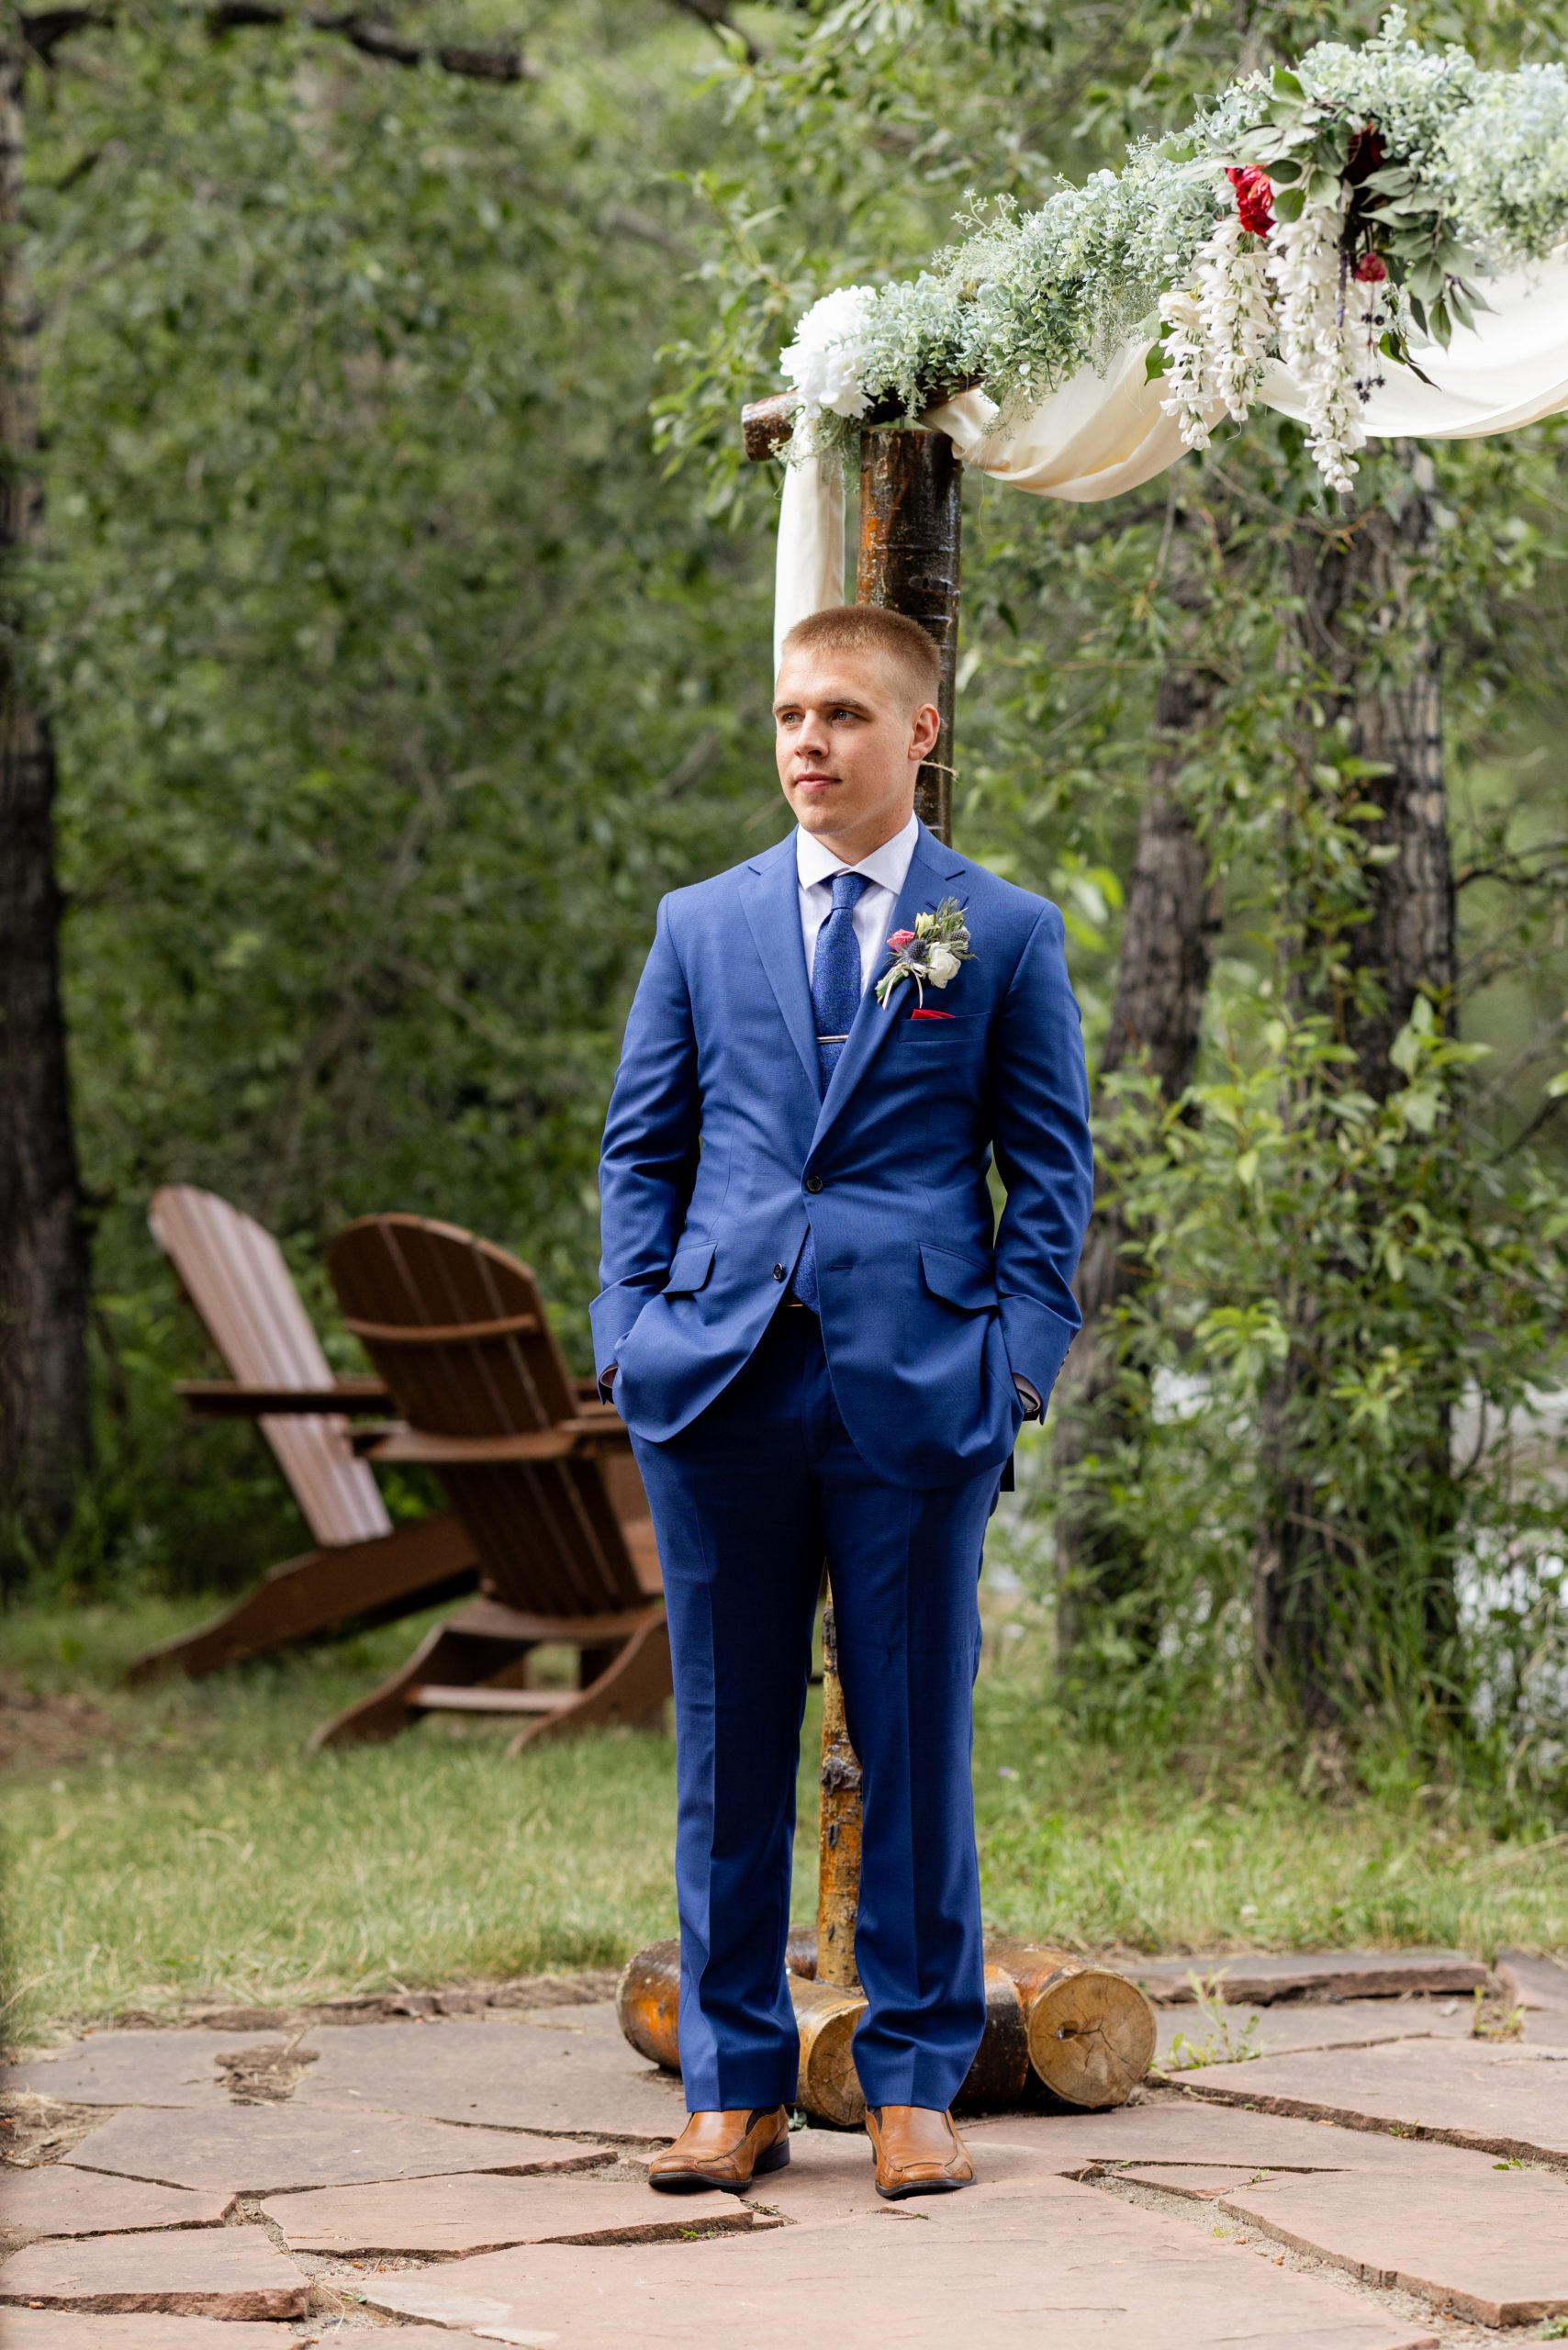 The groom waits patiently for his bride at the altar at Romantic RiverSong Inn in Estes Park on their wedding day. 